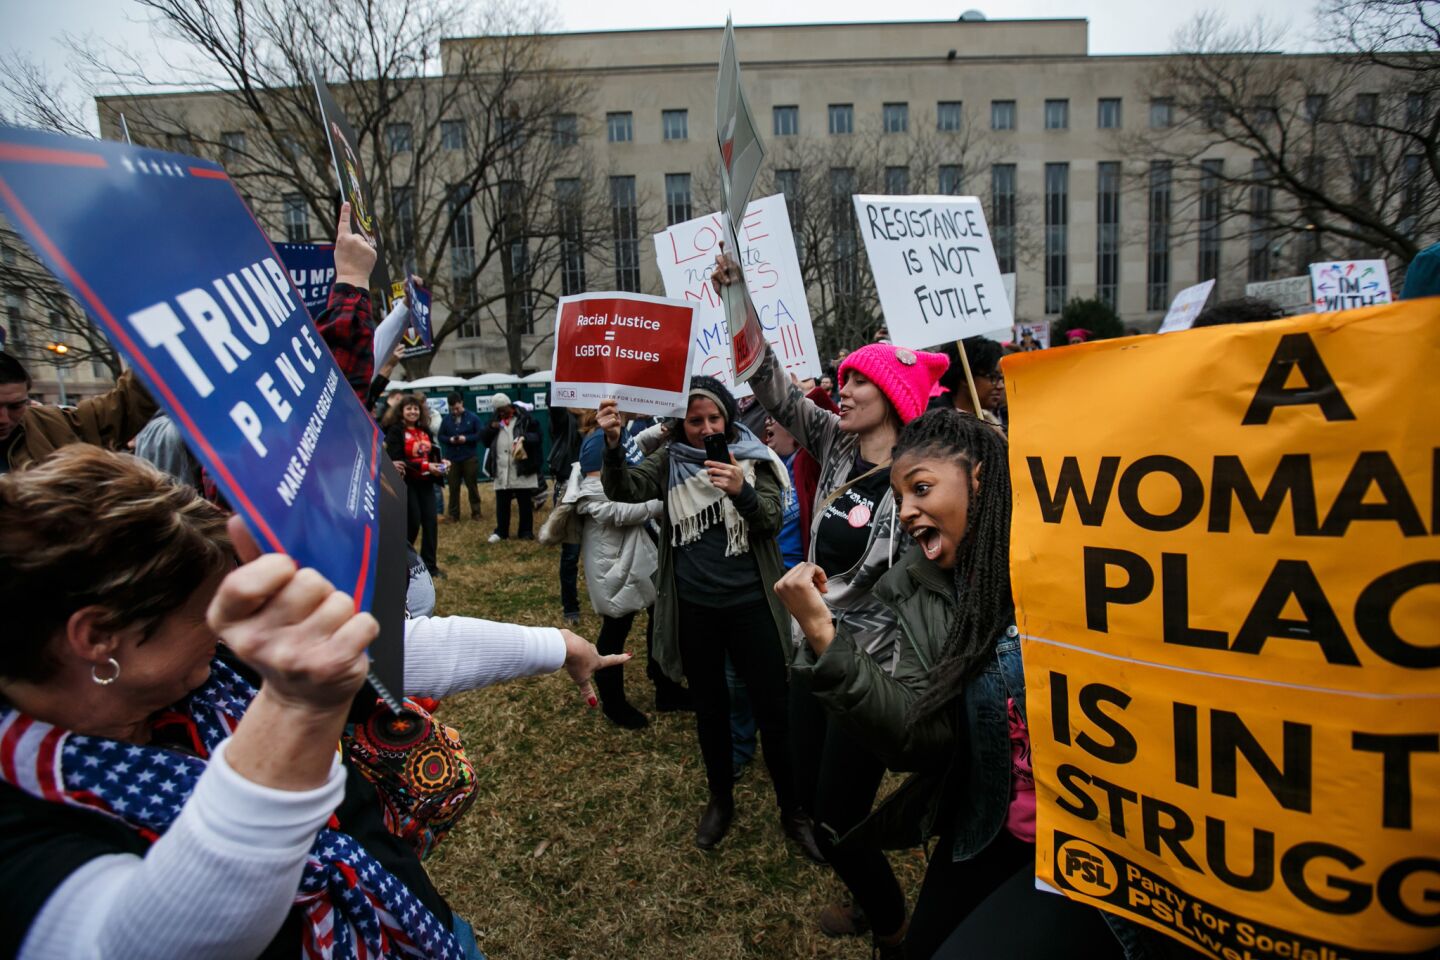 Kennedy Stacy, right, has a peaceful dance off with Debbie Clay, far left, a member of Bikers for Trump, as thousands of people march for women's rights in Washington, D.C.